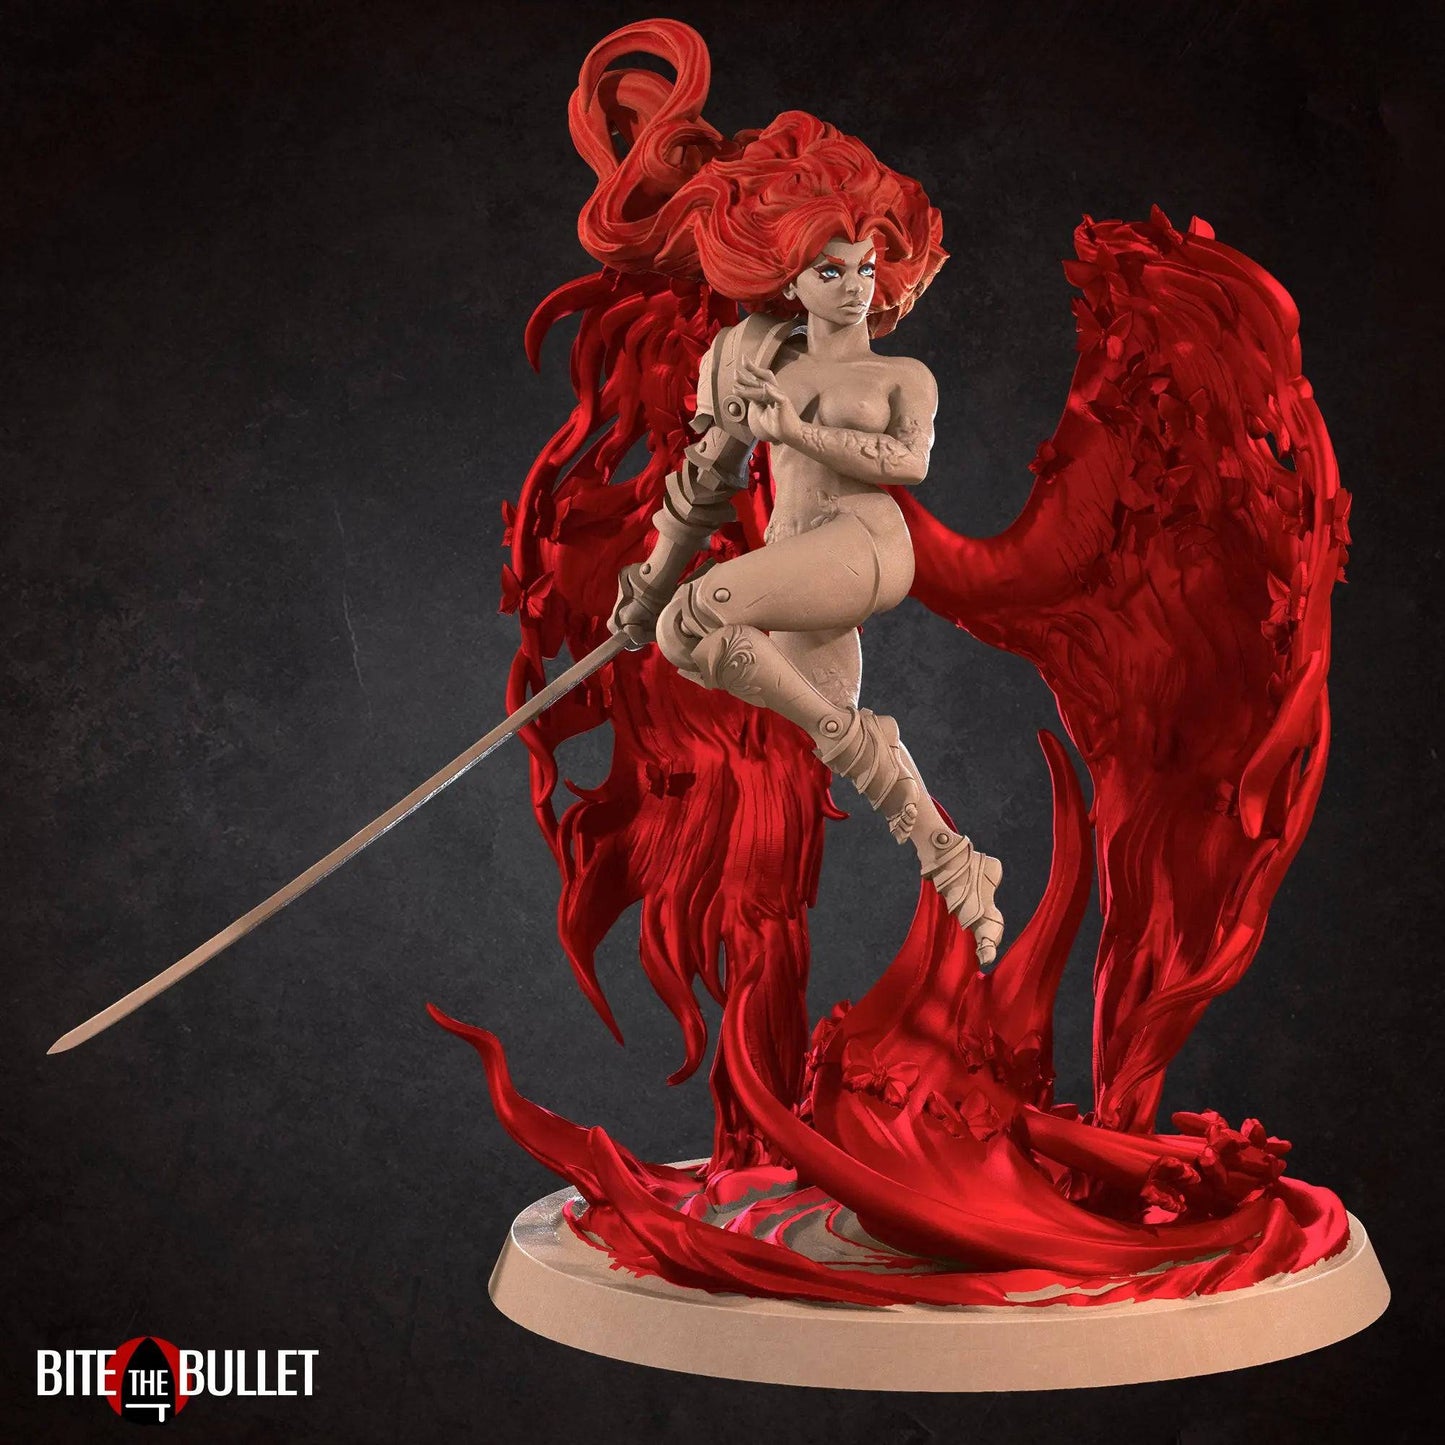 Morgana, Pinup SFW NSFW Lovely Woman, the Scarlet Goddess | D&D Miniature Pinup | Bite the Bullet - Tattles Told 3D